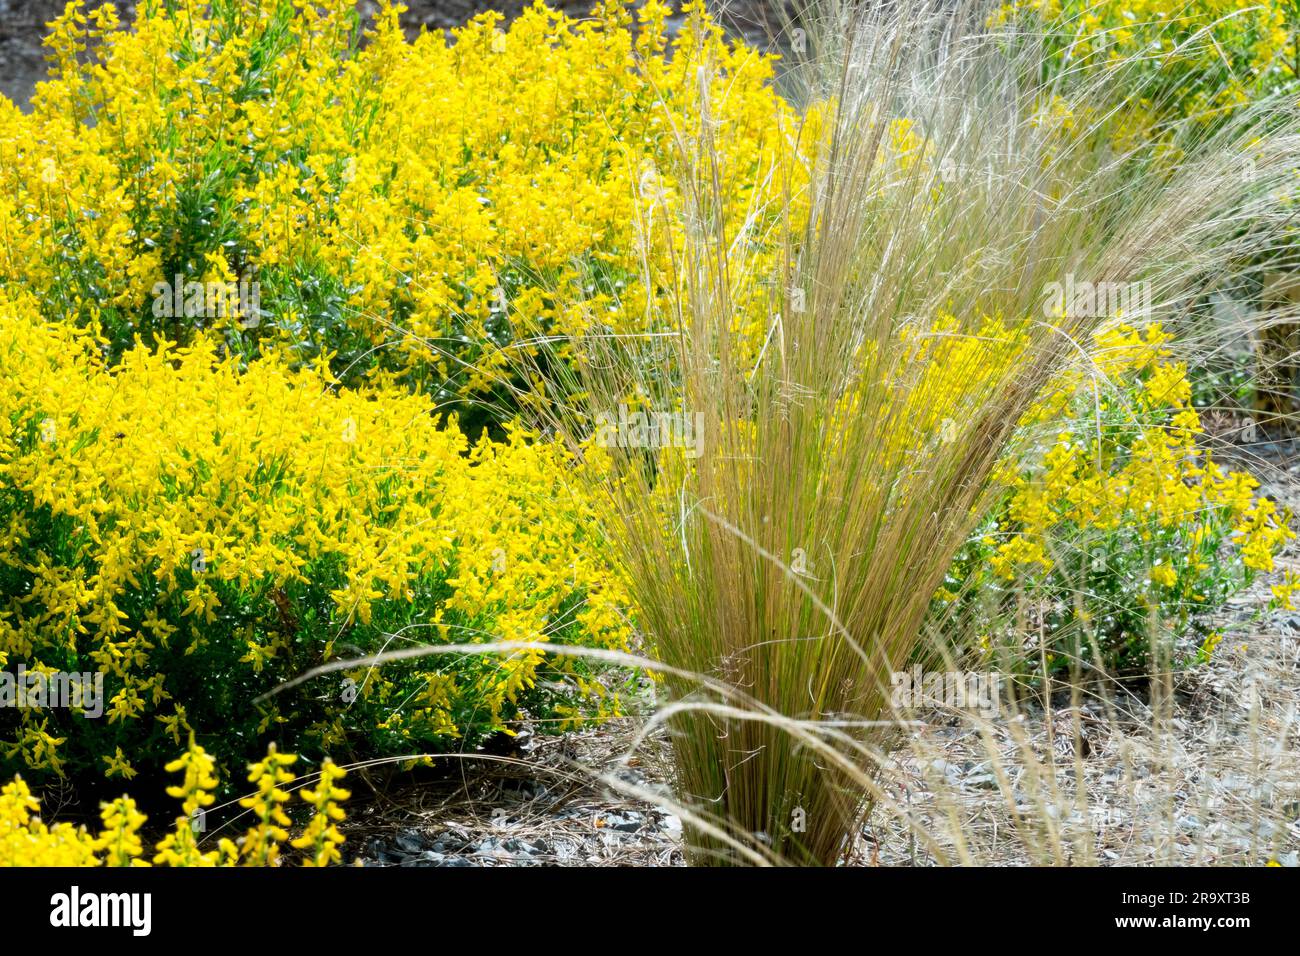 Genista germanica, Ponytail Grass, Genista garden German Greenweed Diminutive Small Perennial Plant Low Cushion Plants Yellow June Flowers Stock Photo